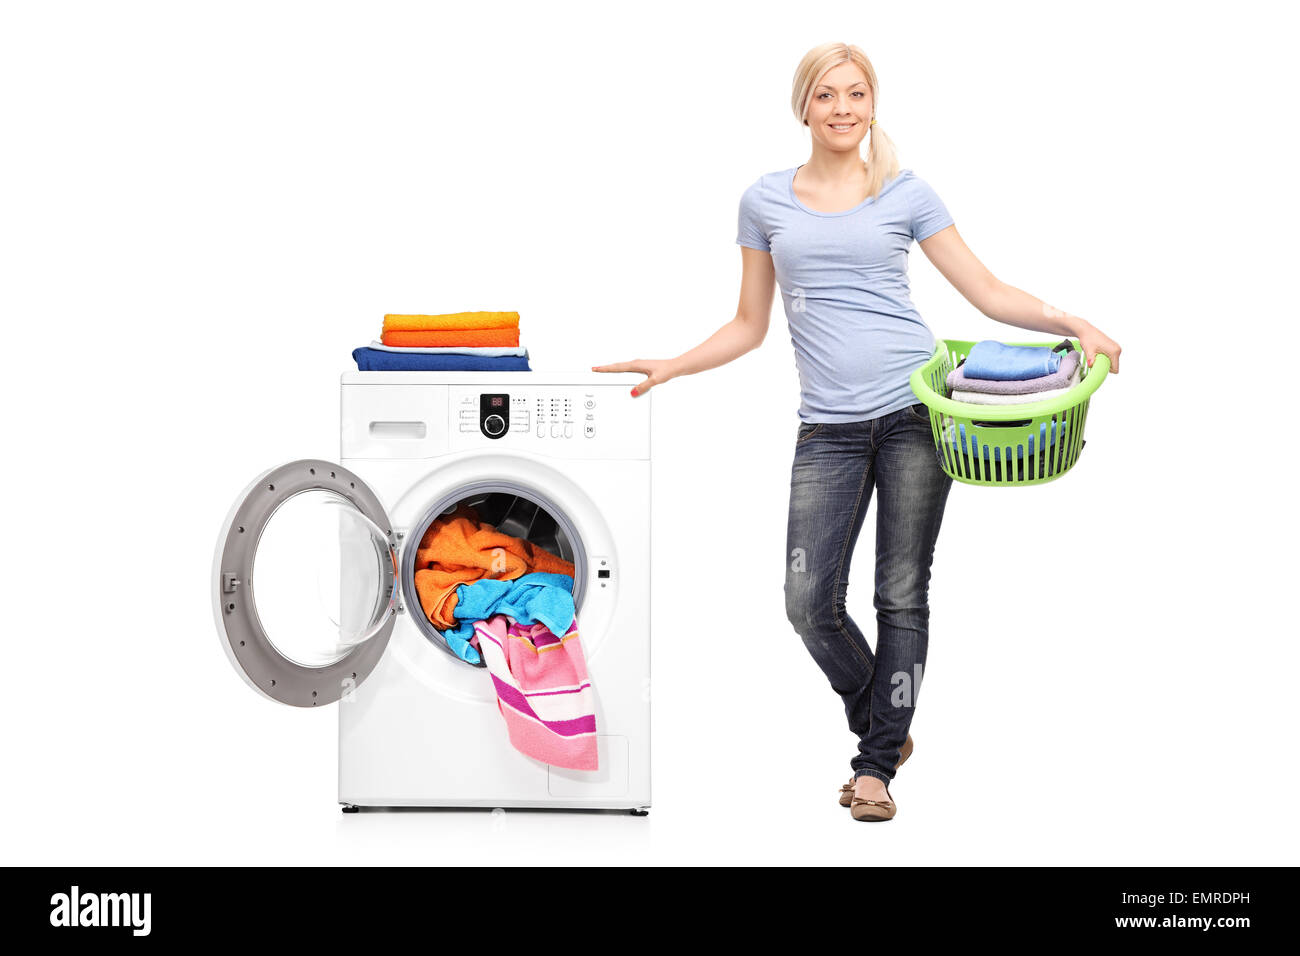 Full length portrait of a young woman holding a laundry basket full of folded clothes and posing next to a washing machine Stock Photo